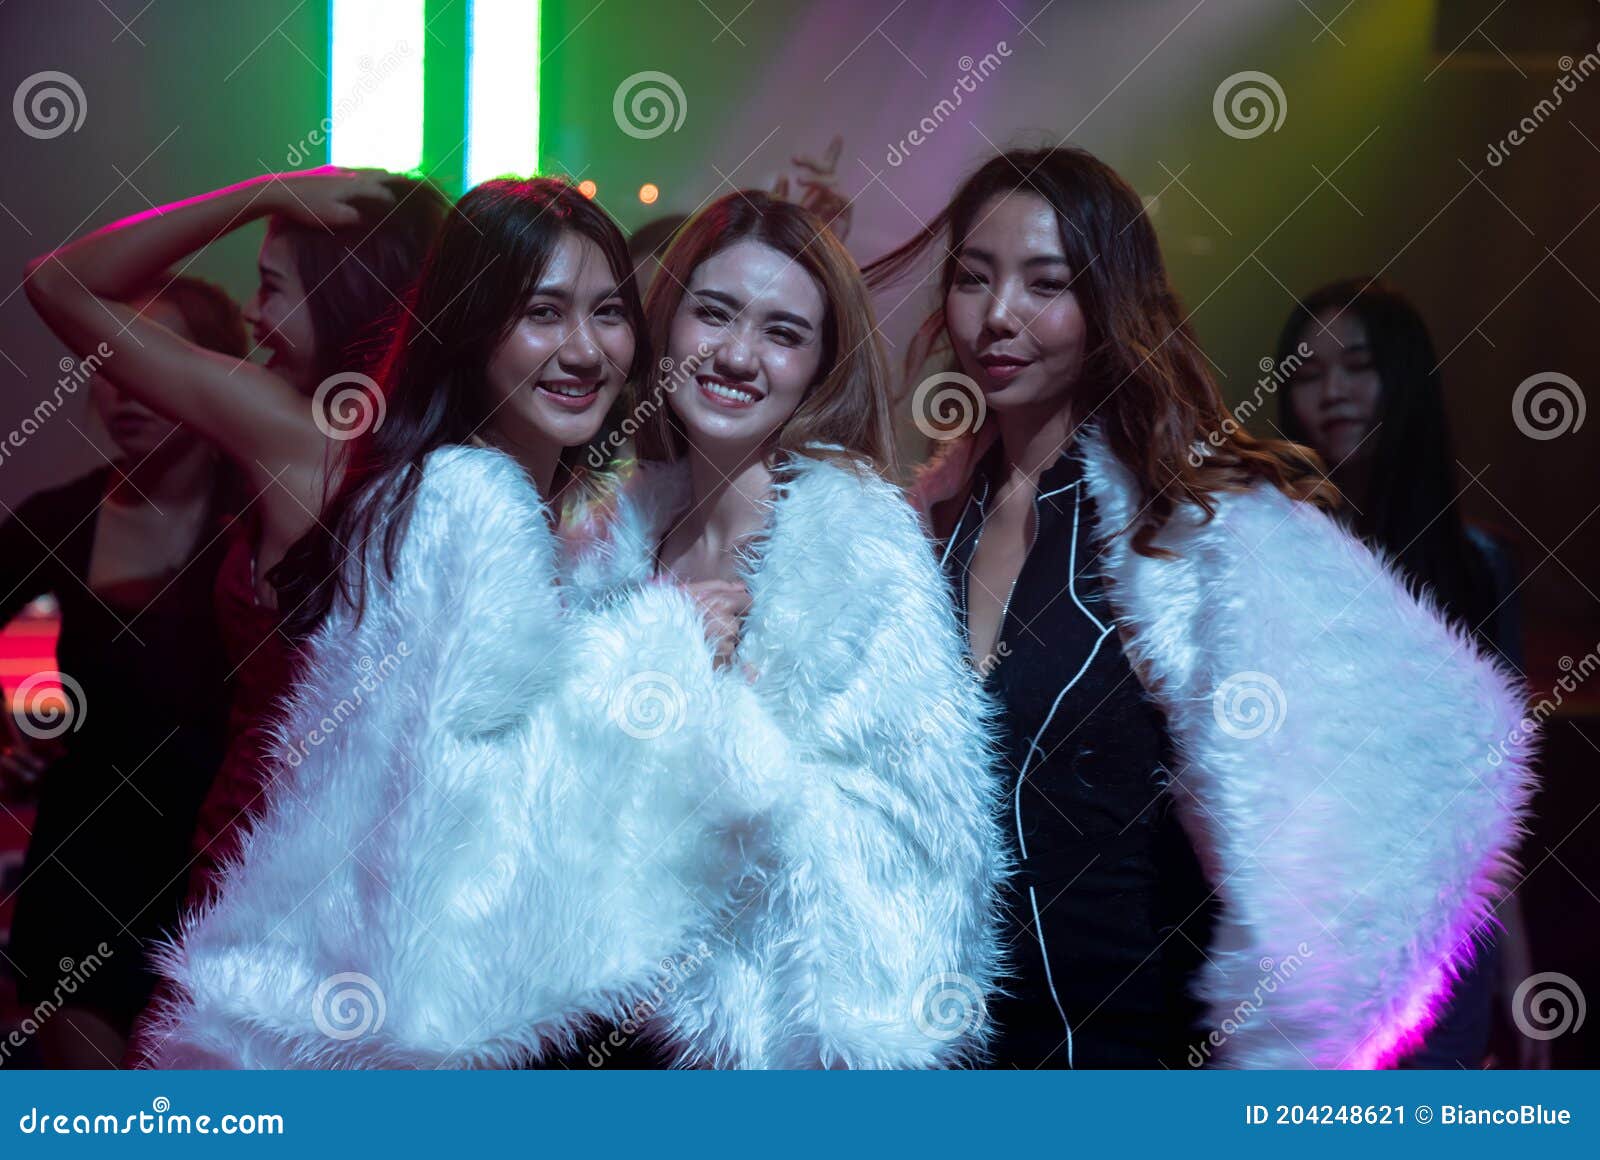 Group Of Women Friend Having Fun At Party In Dancing Club Stock Image